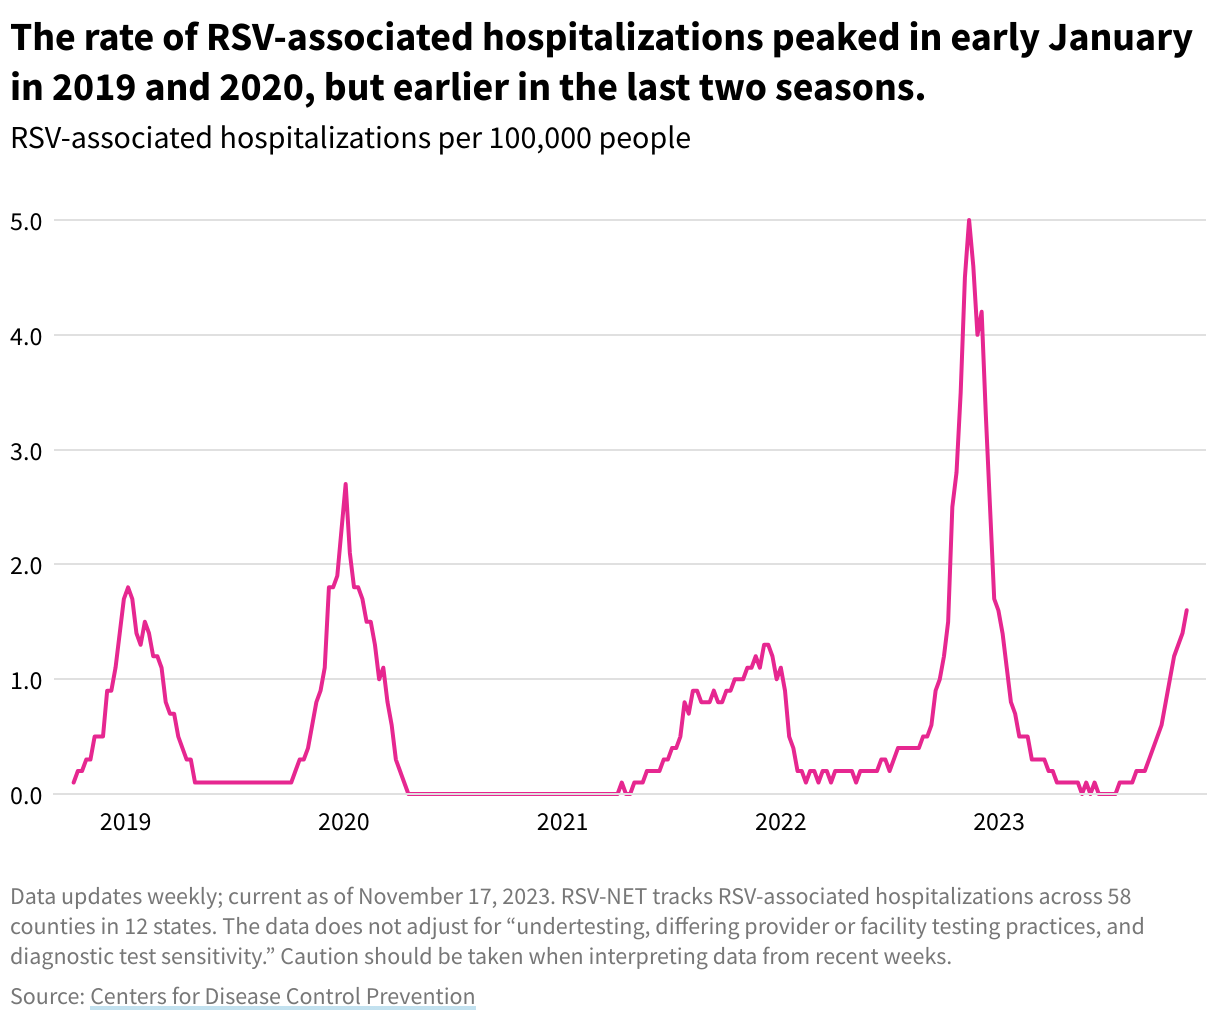 Line chart showing the rate of RSV-associated hospitalizations per 100,000 people from October 2018 to November 11, 2023. 